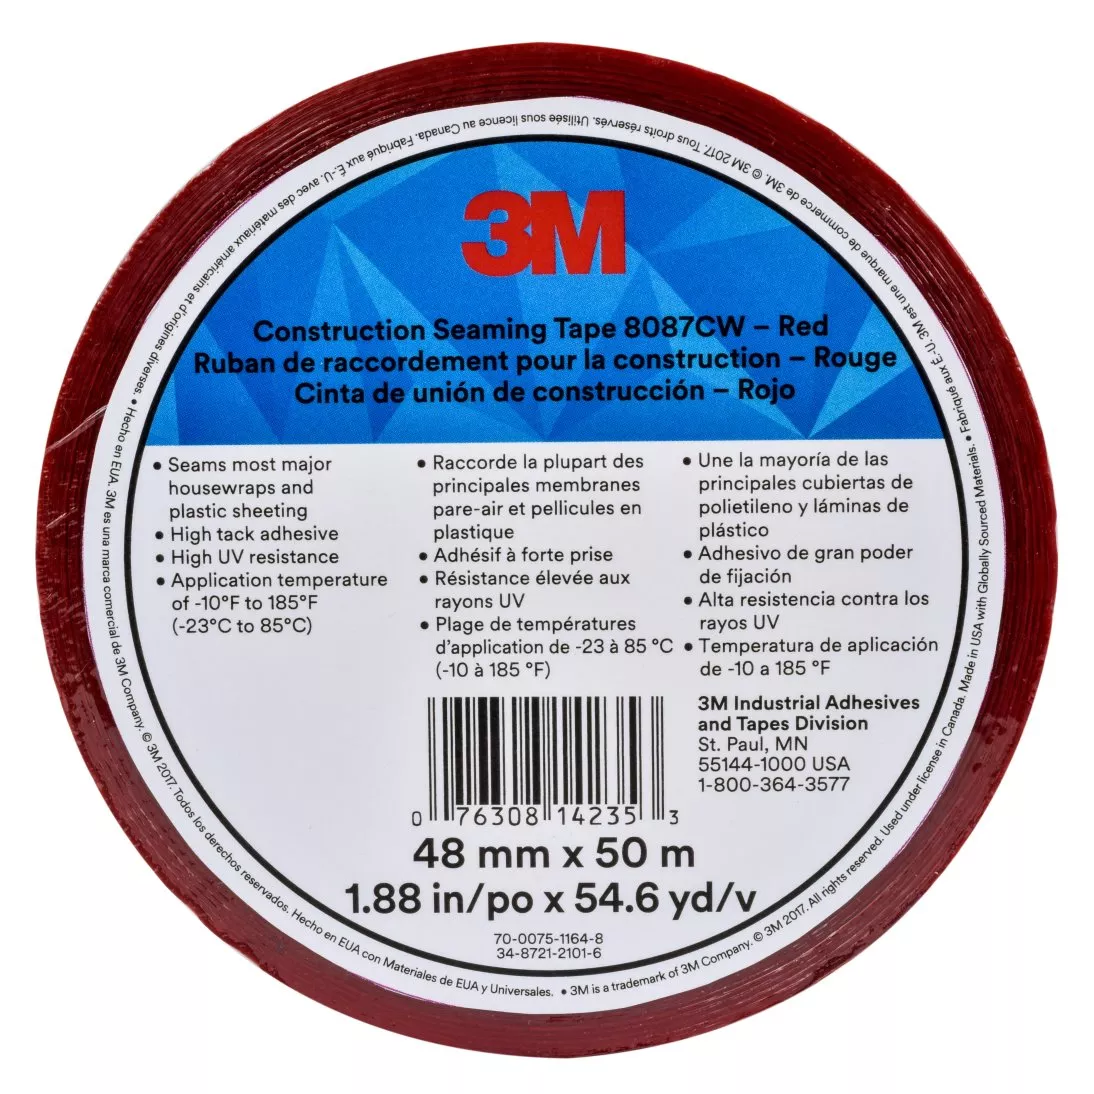 3M™ Construction Seaming Tape 8087CW, Red, 48 mm x 50 m, 24 rolls per
case